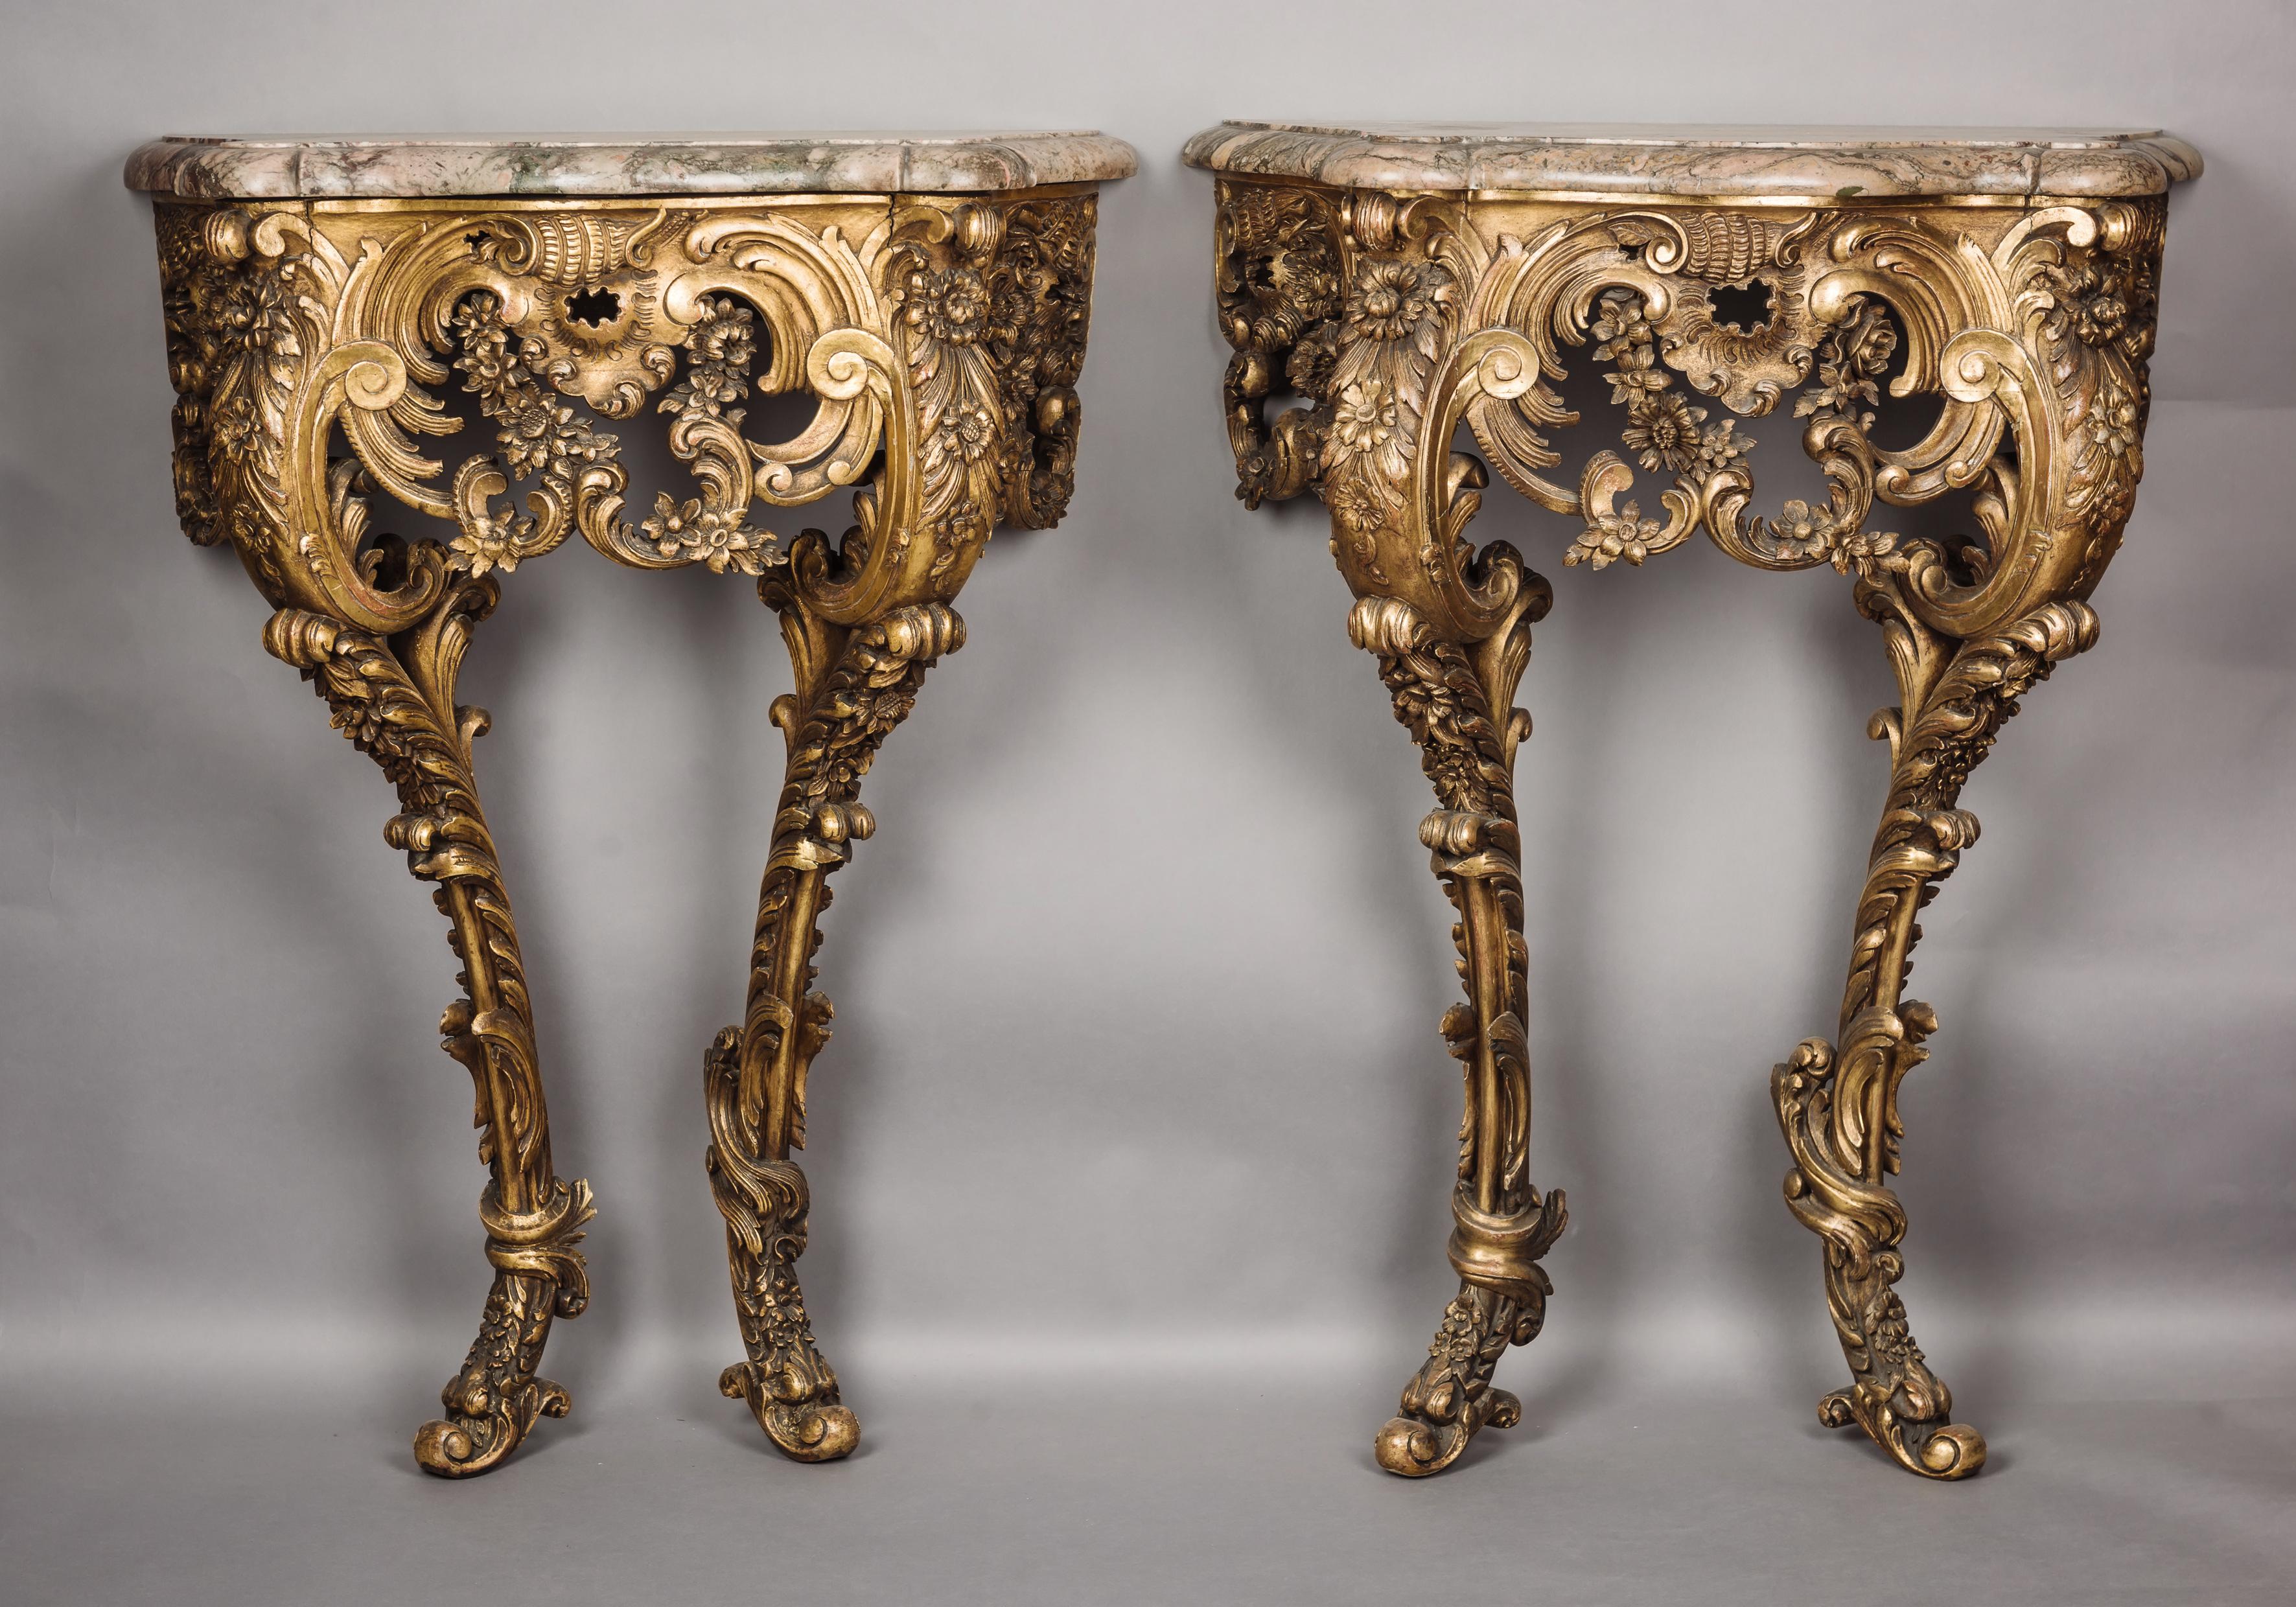 An Unusual Pair of Petit Rococo Revival Giltwood Console Tables. 

French, Circa 1860. 

The console tables each have a moulded marble top of serpentine outline above a conforming giltwood frieze elaborately carved in the rococo style with